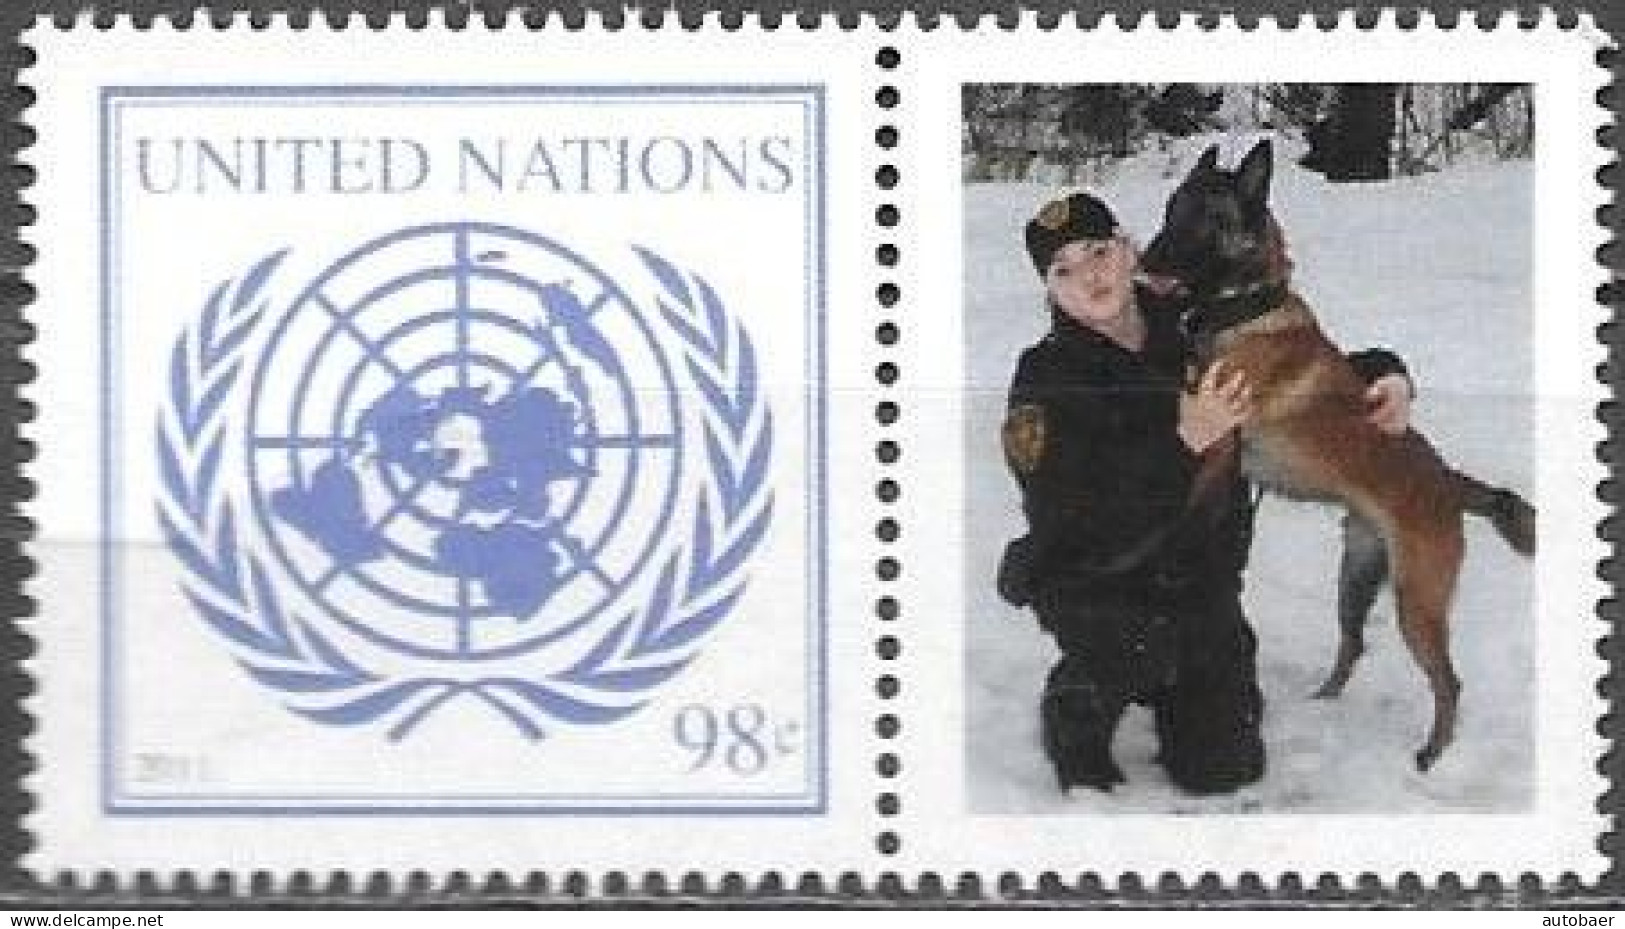 United Nations UNO UN Vereinte Nationen New York 2011 Greetings Working Dogs Mi.No.1253 Label MNH ** Neuf - Unused Stamps